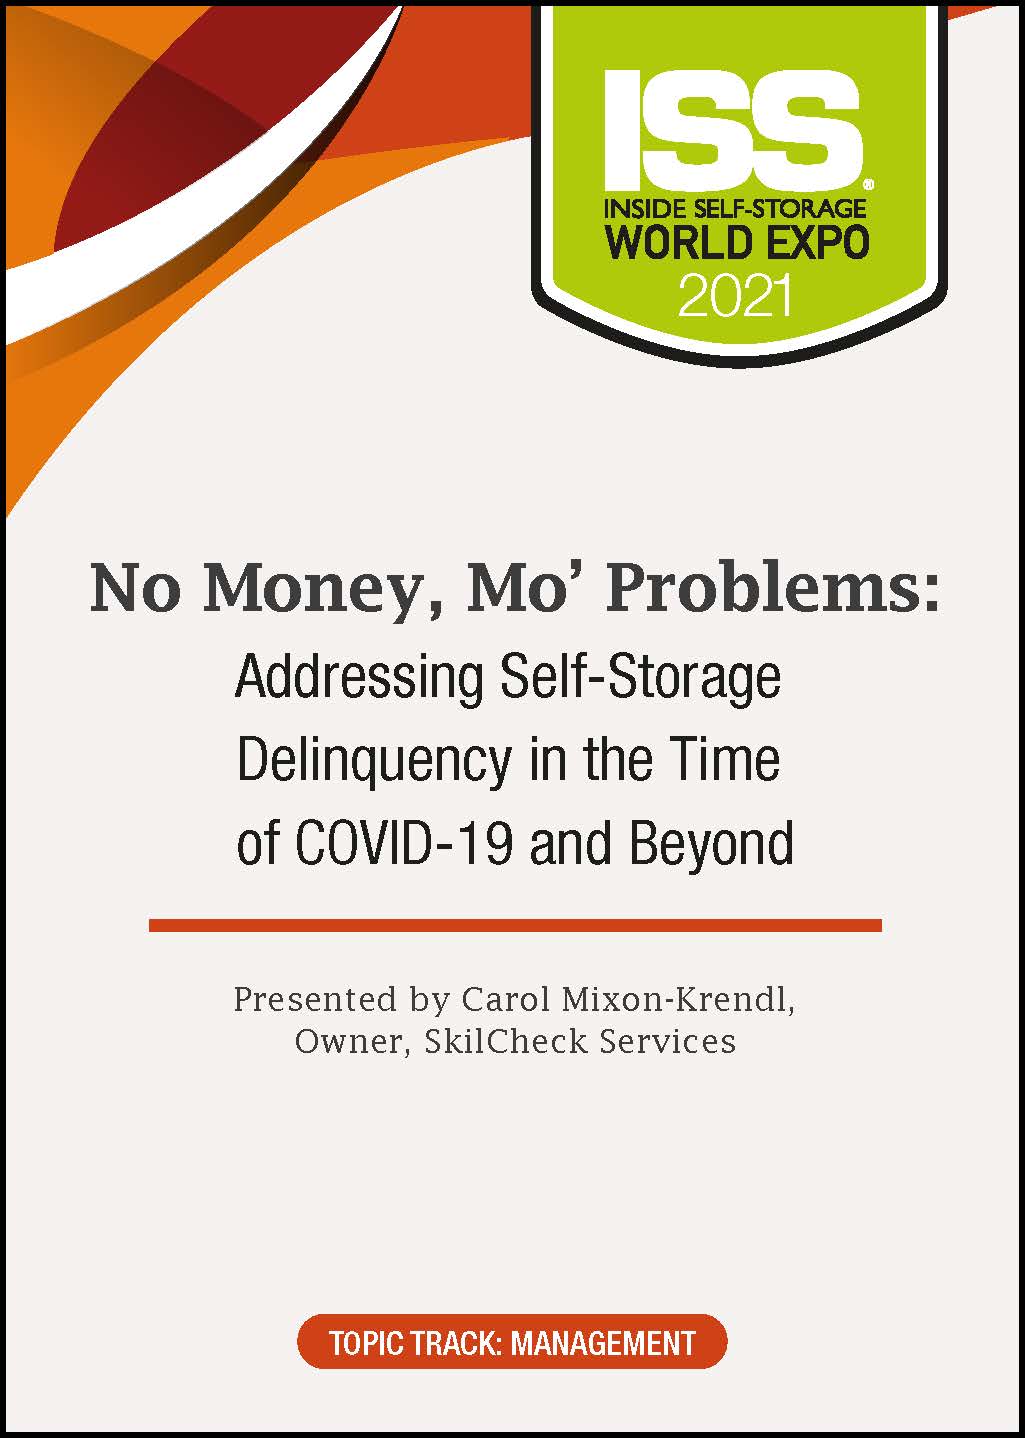 No Money, Mo' Problems: Addressing Self-Storage Delinquency in the Time of COVID-19 and Beyond